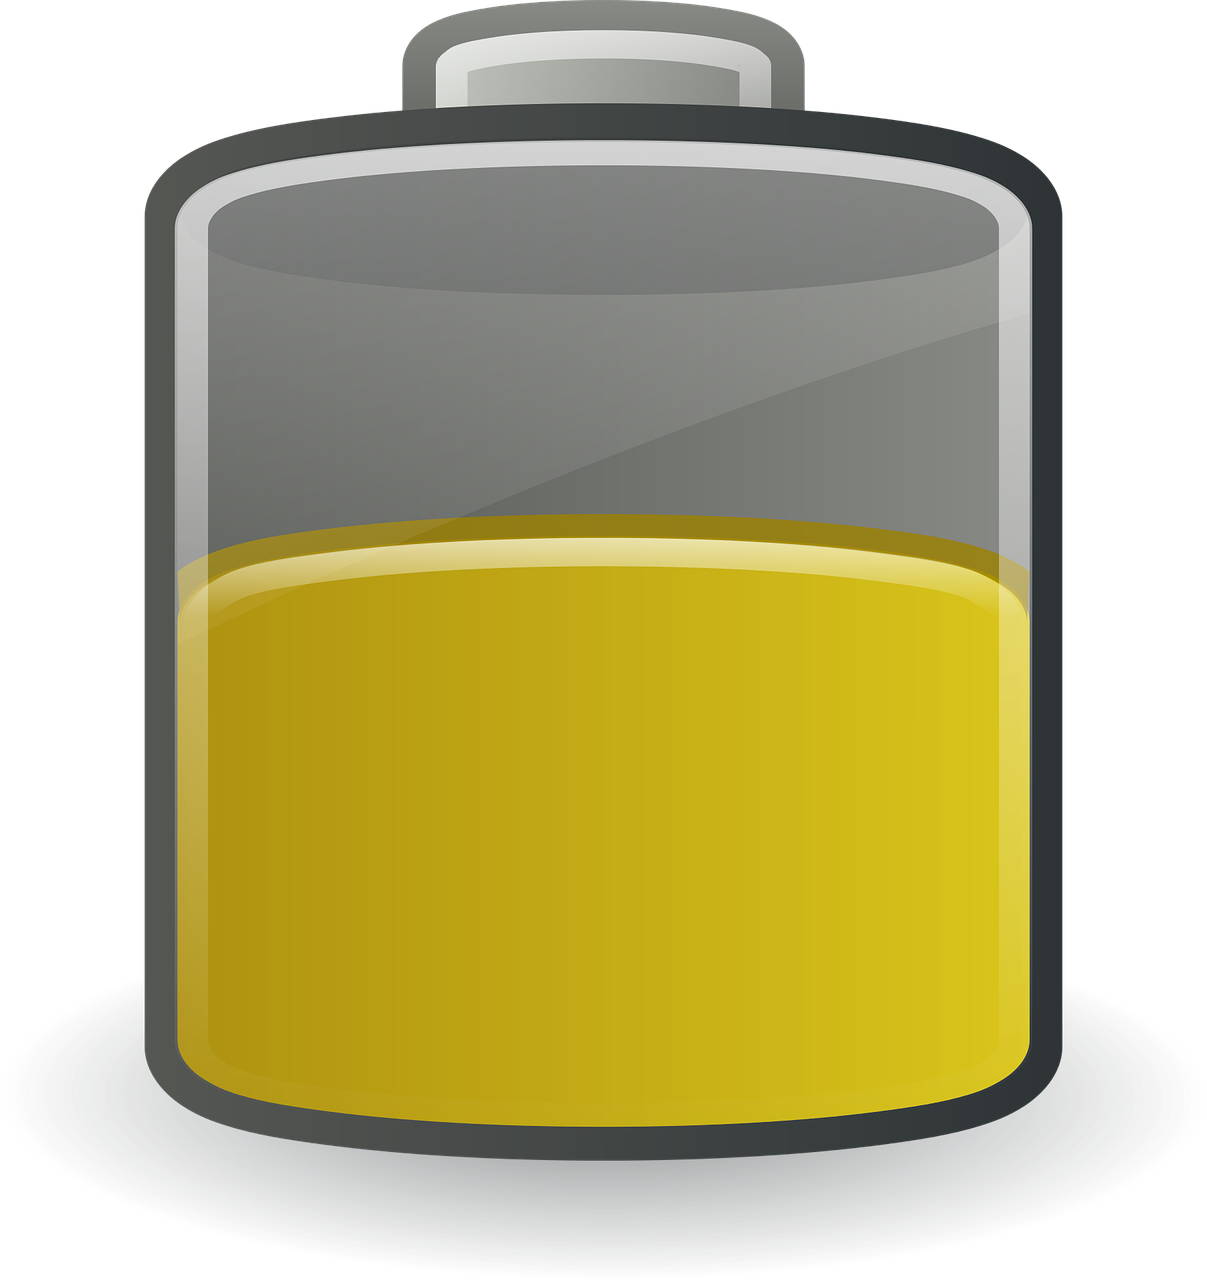 a battery with a yellow liquid in it, an illustration of, by Andrei Kolkoutine, pixabay, transparent glass, black main color, full lenght view, platform